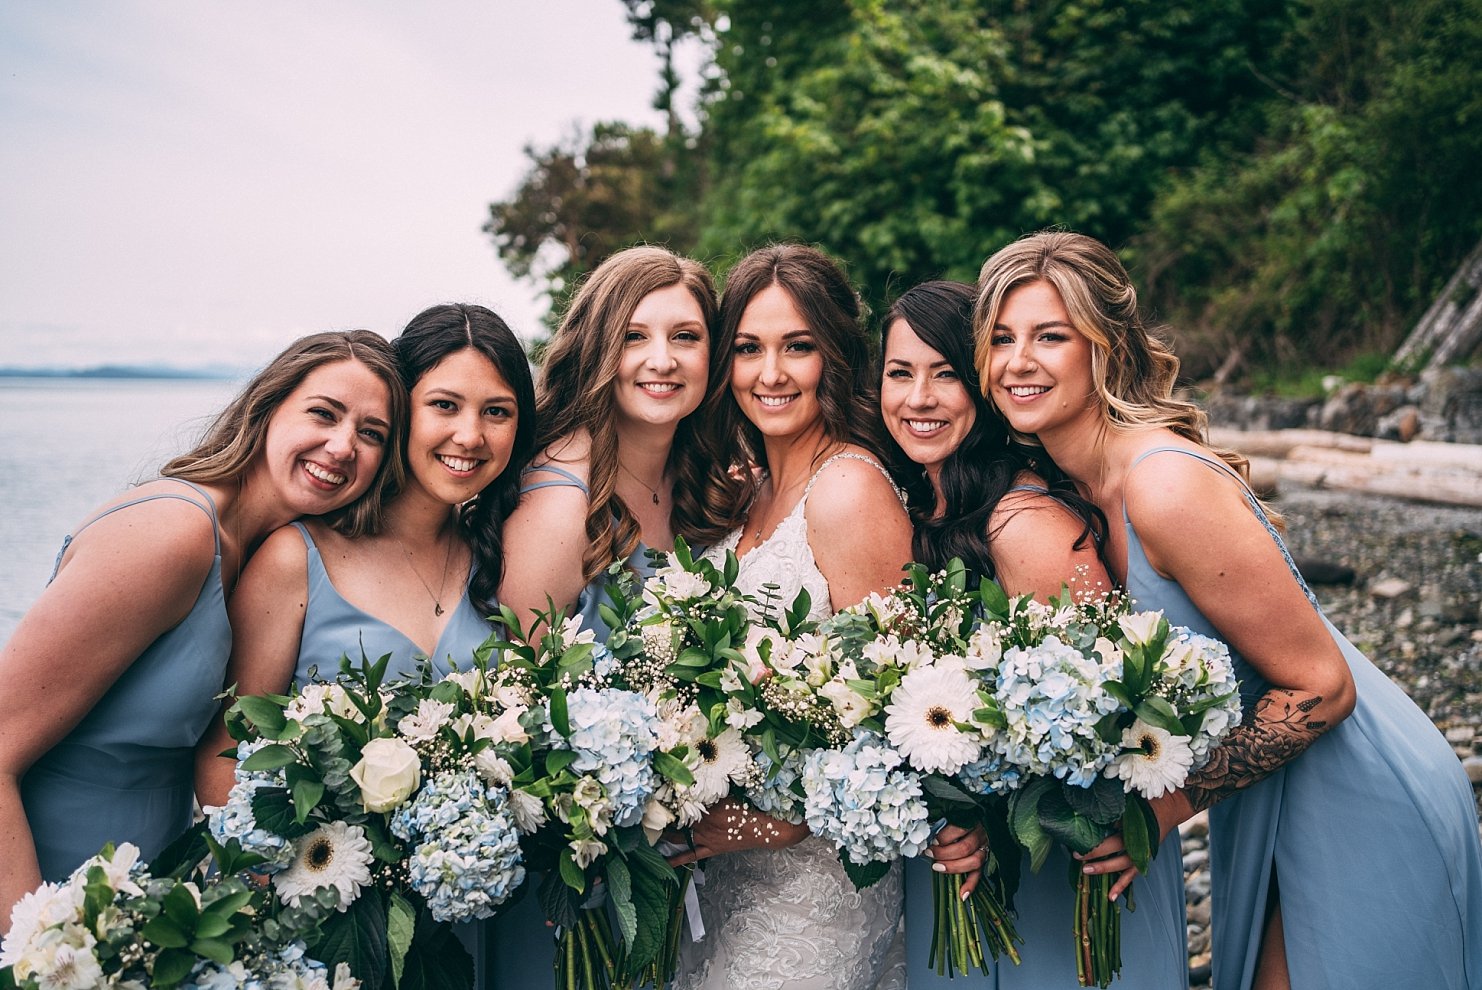 blue bridesmaid dresses with white and blue flowers